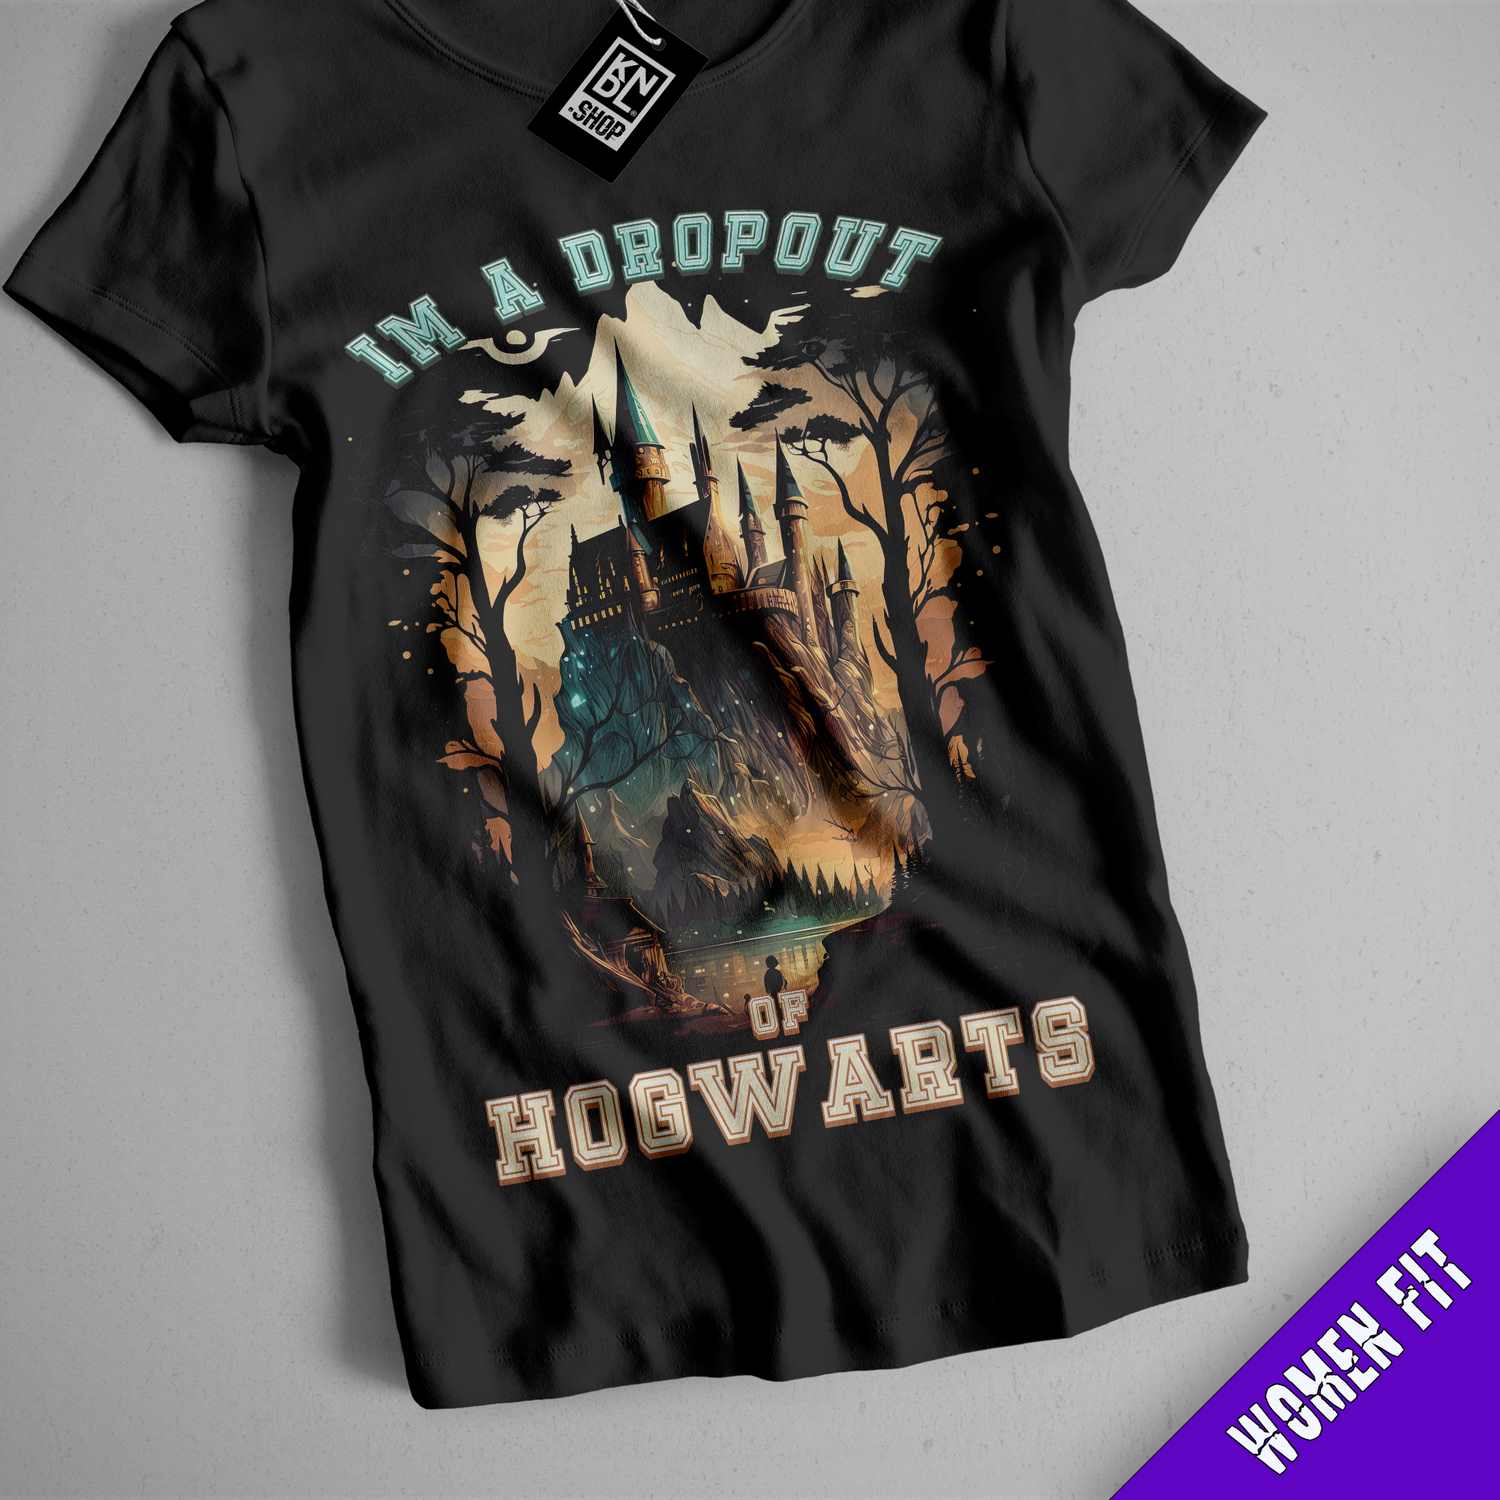 a black t - shirt with a hogwarts image on it